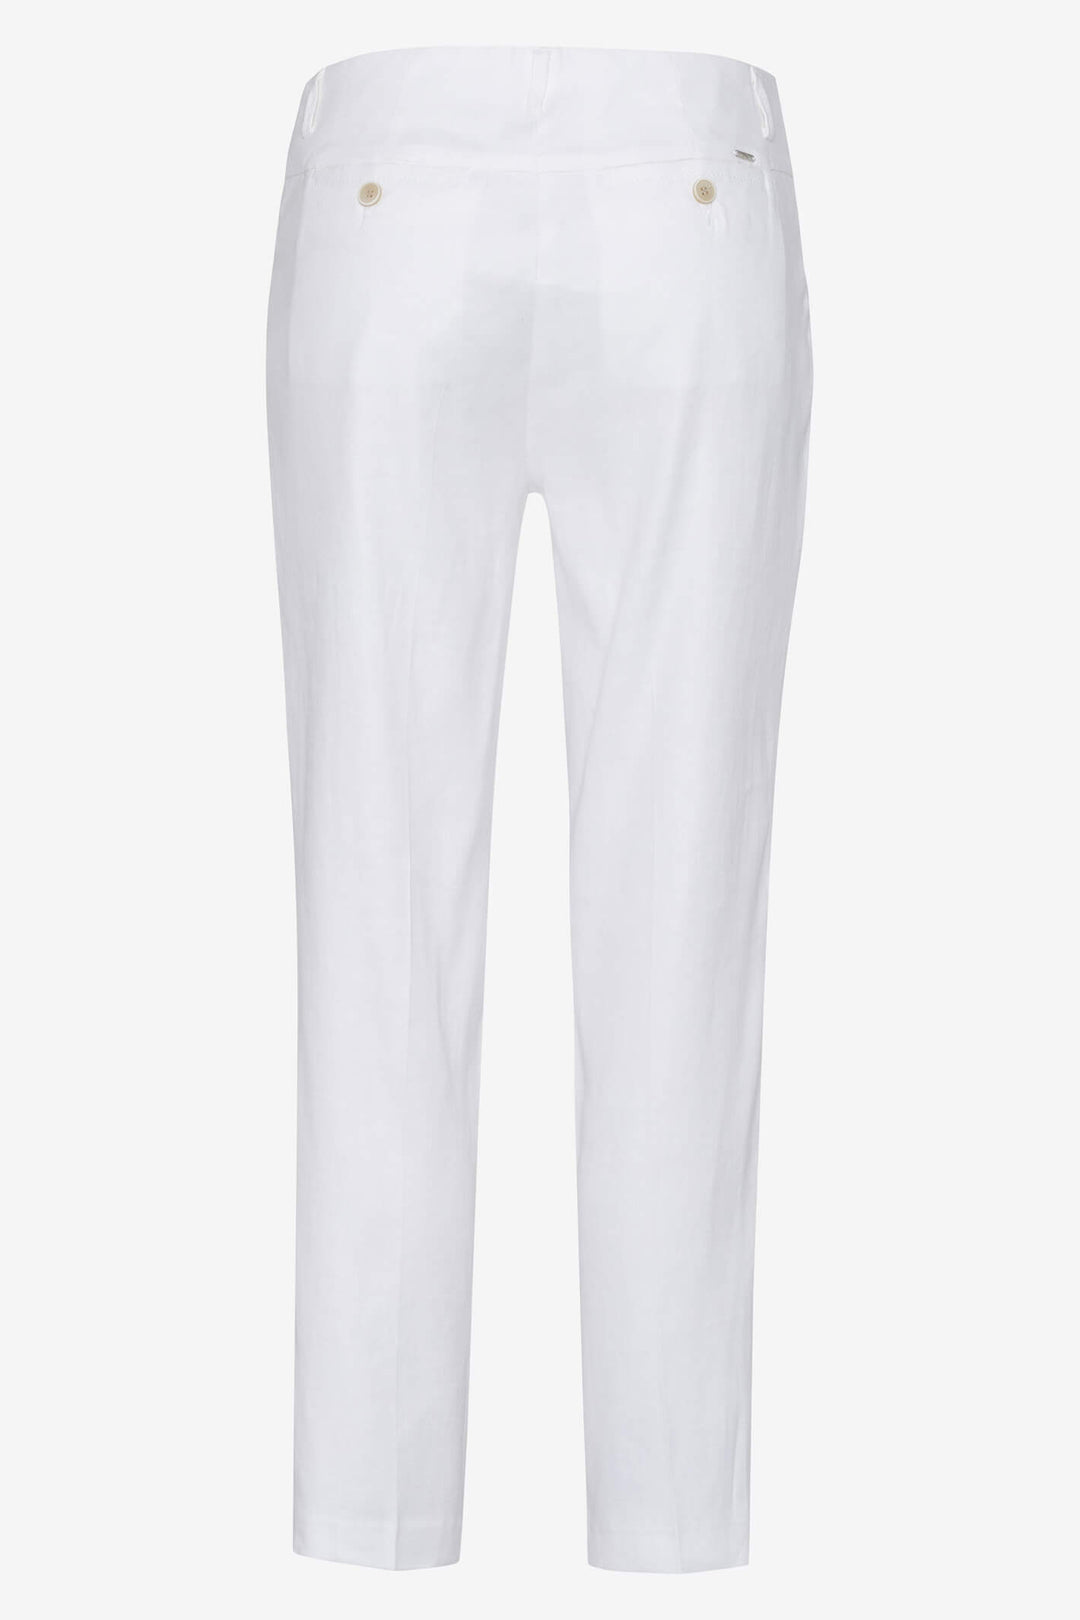 Brax 72-2258 98 Off-White Maron Flat Front 7-8 Length Trouser - Shirley Allum Boutique